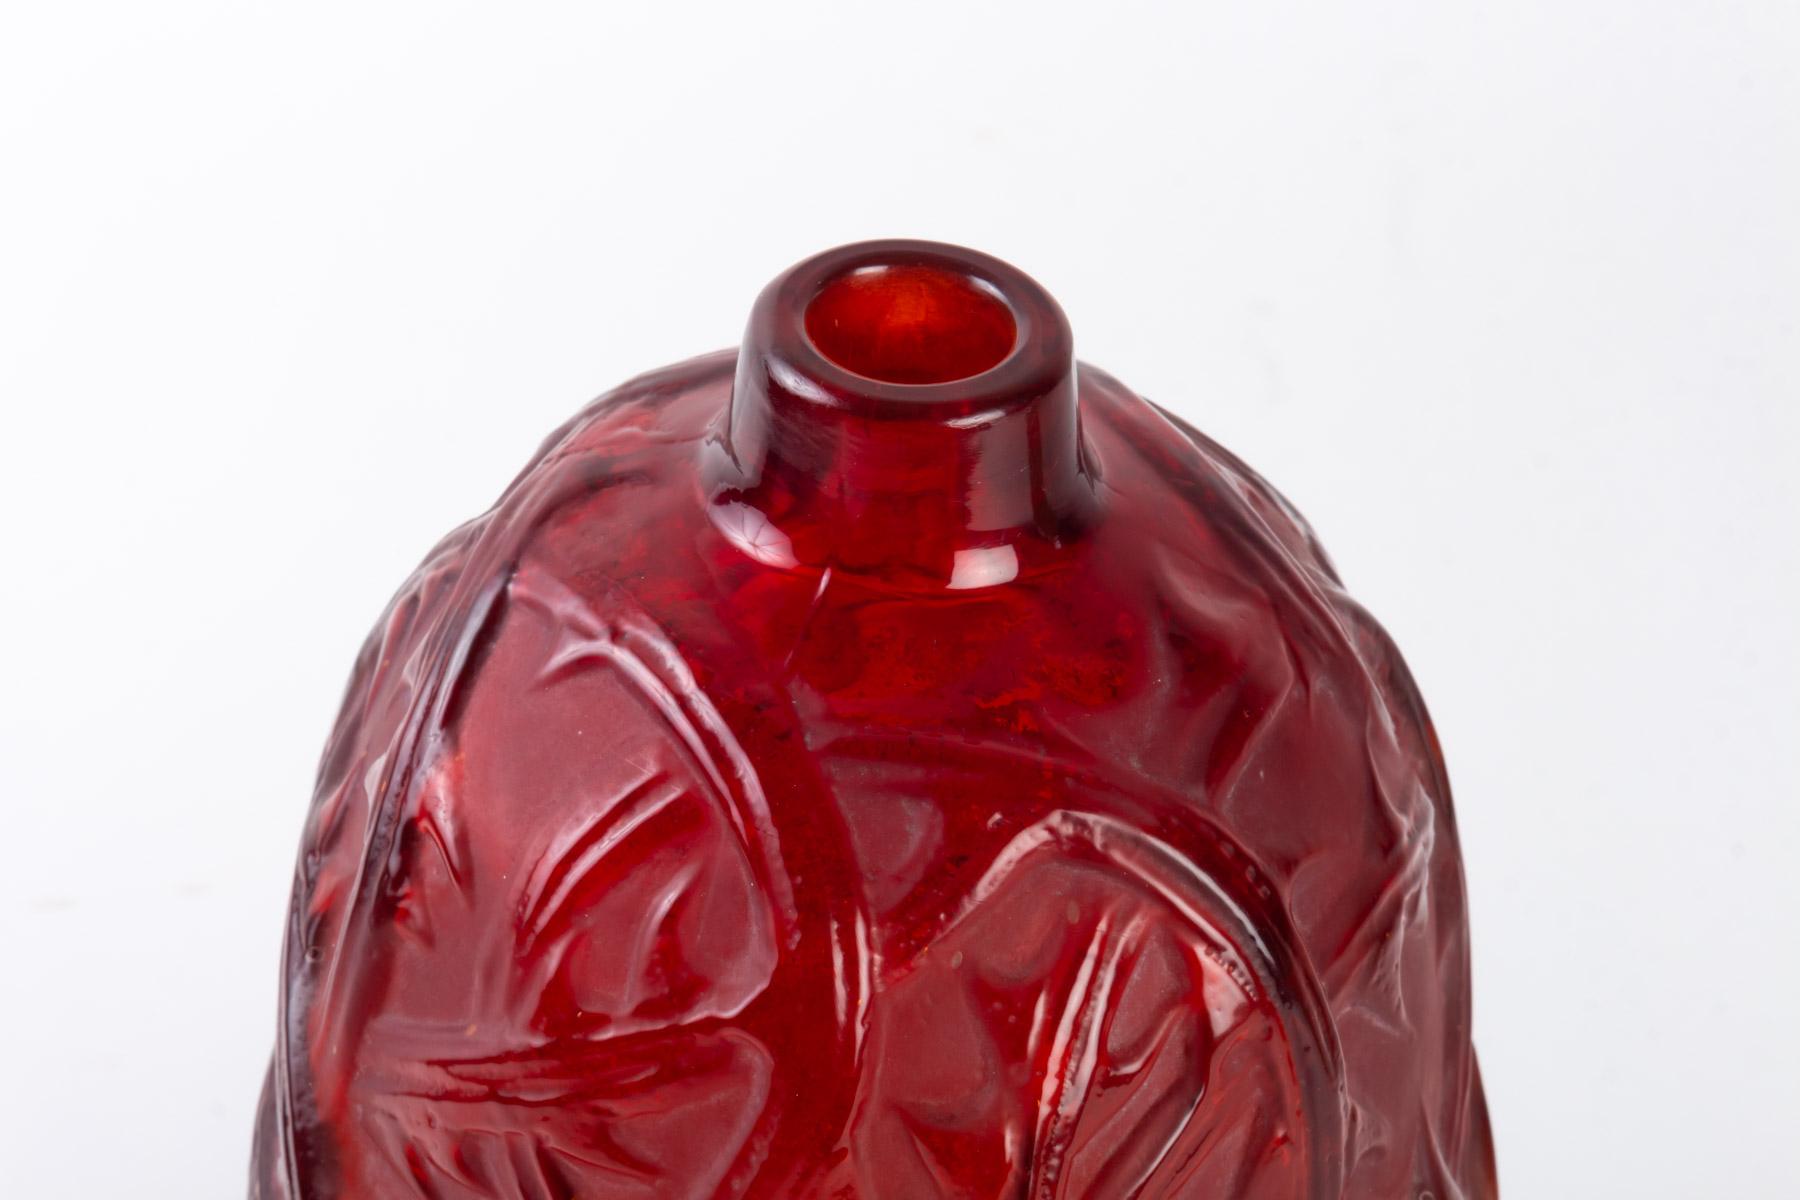 Art Deco 1921 René Lalique Ronces Vase in Red Glass with White Stain